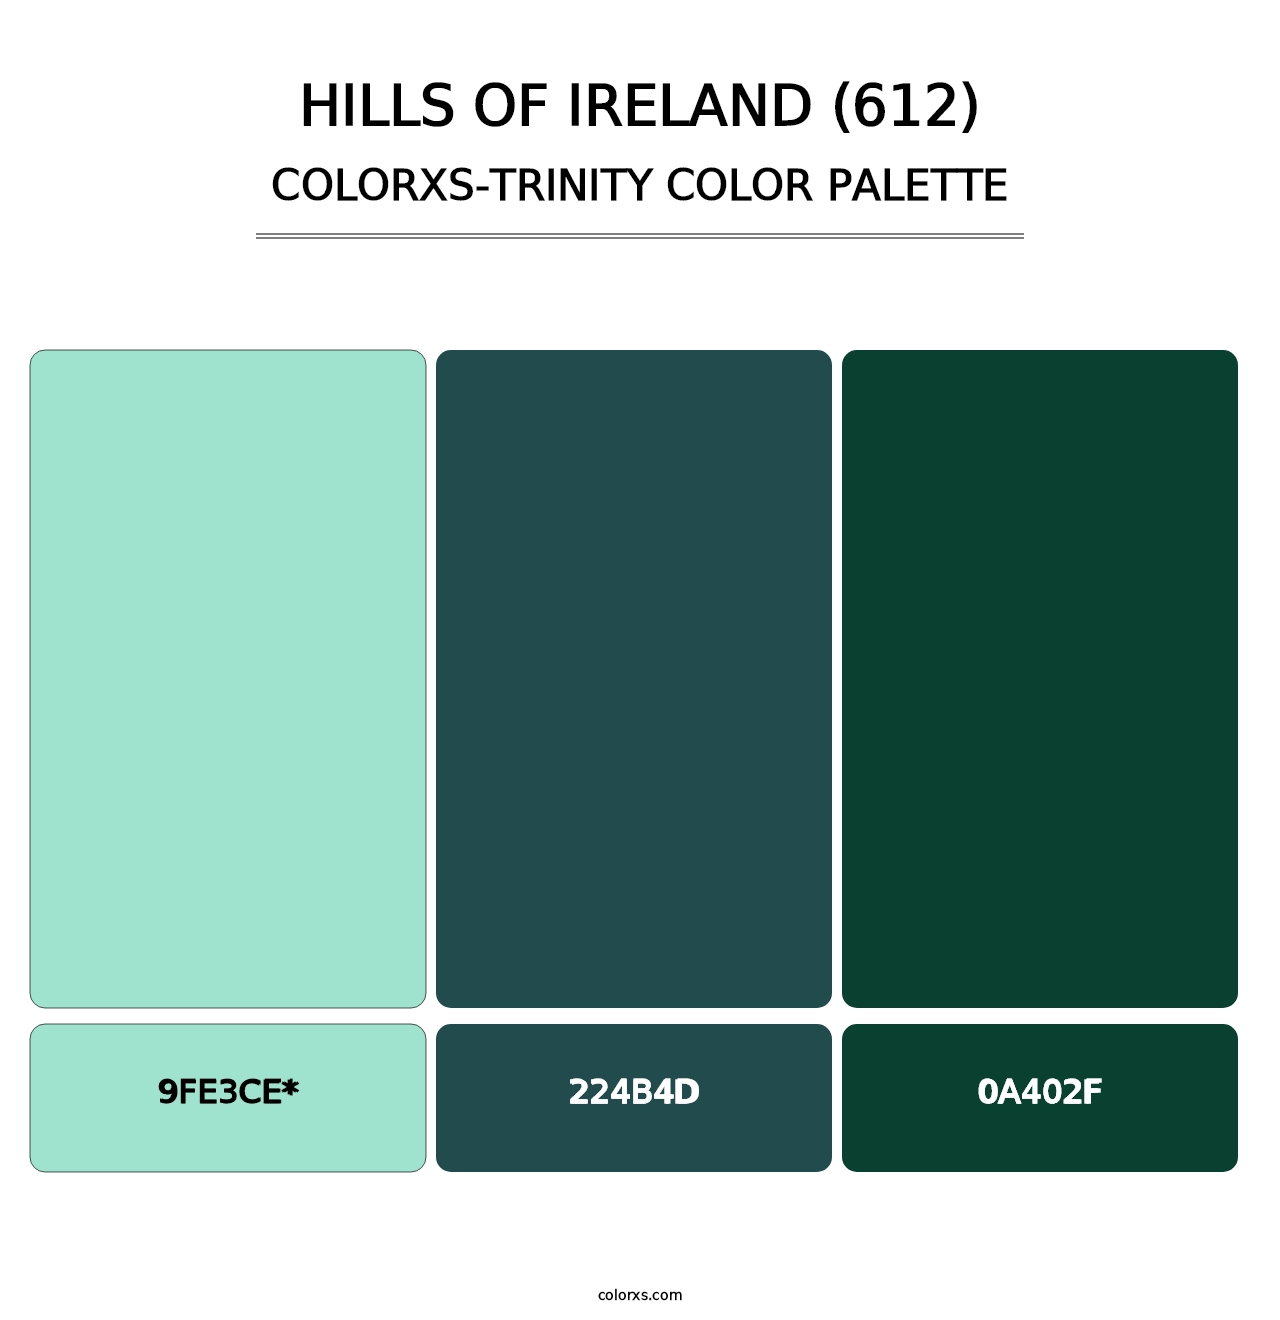 Hills of Ireland (612) - Colorxs Trinity Palette